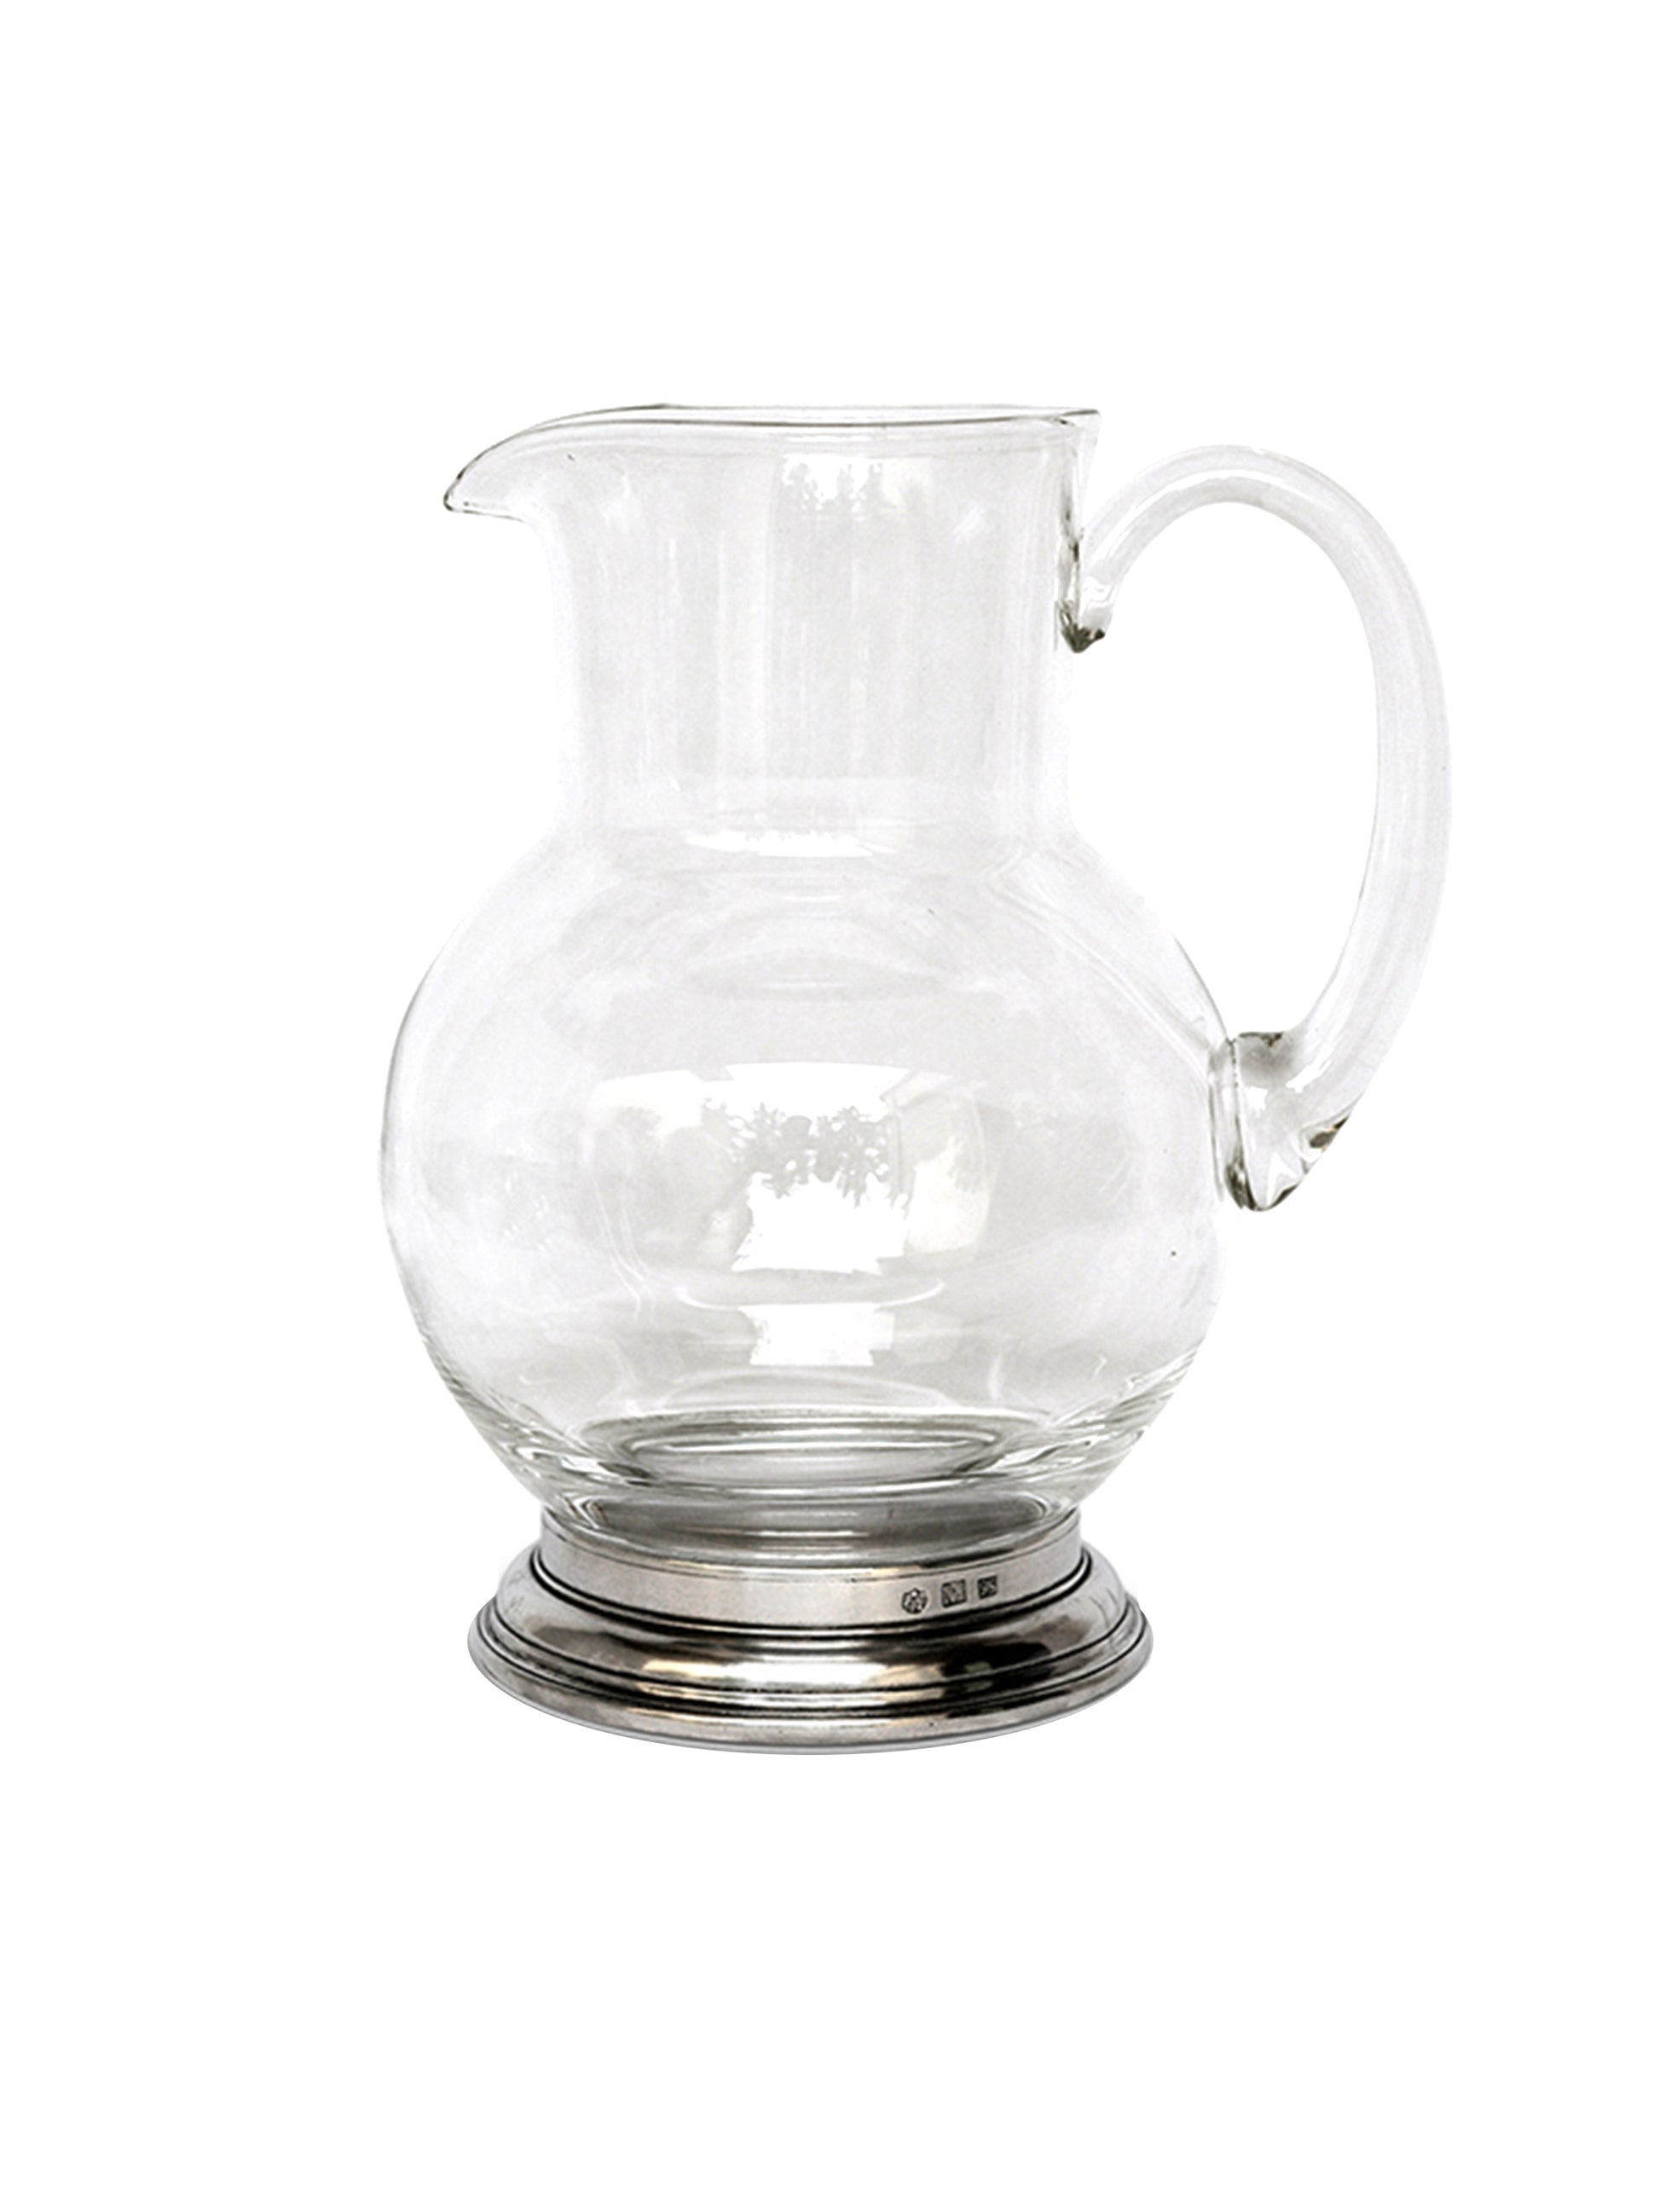 MATCH Pewter Glass Pitcher Large Weston Table